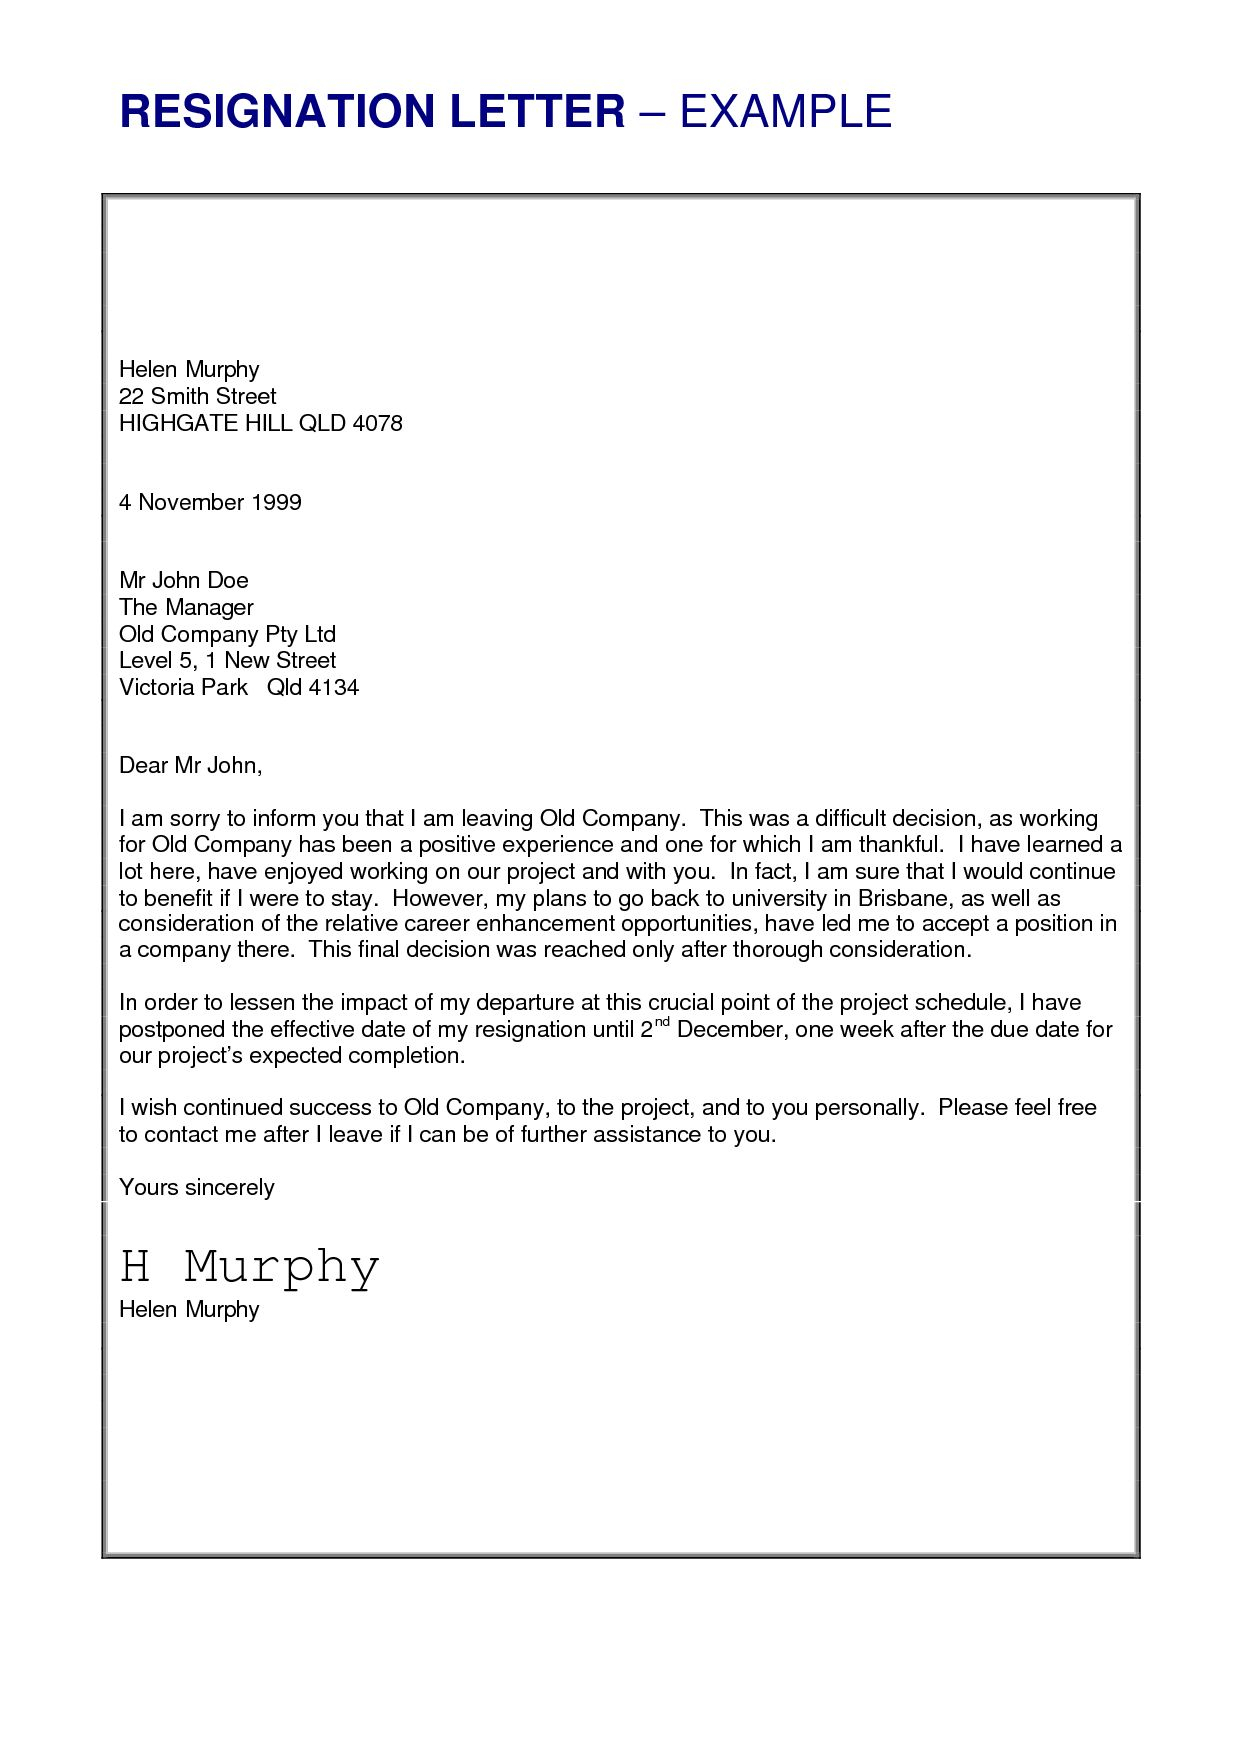 Leave You Job With Outstanding Resignation Letter Template throughout sizing 1242 X 1754